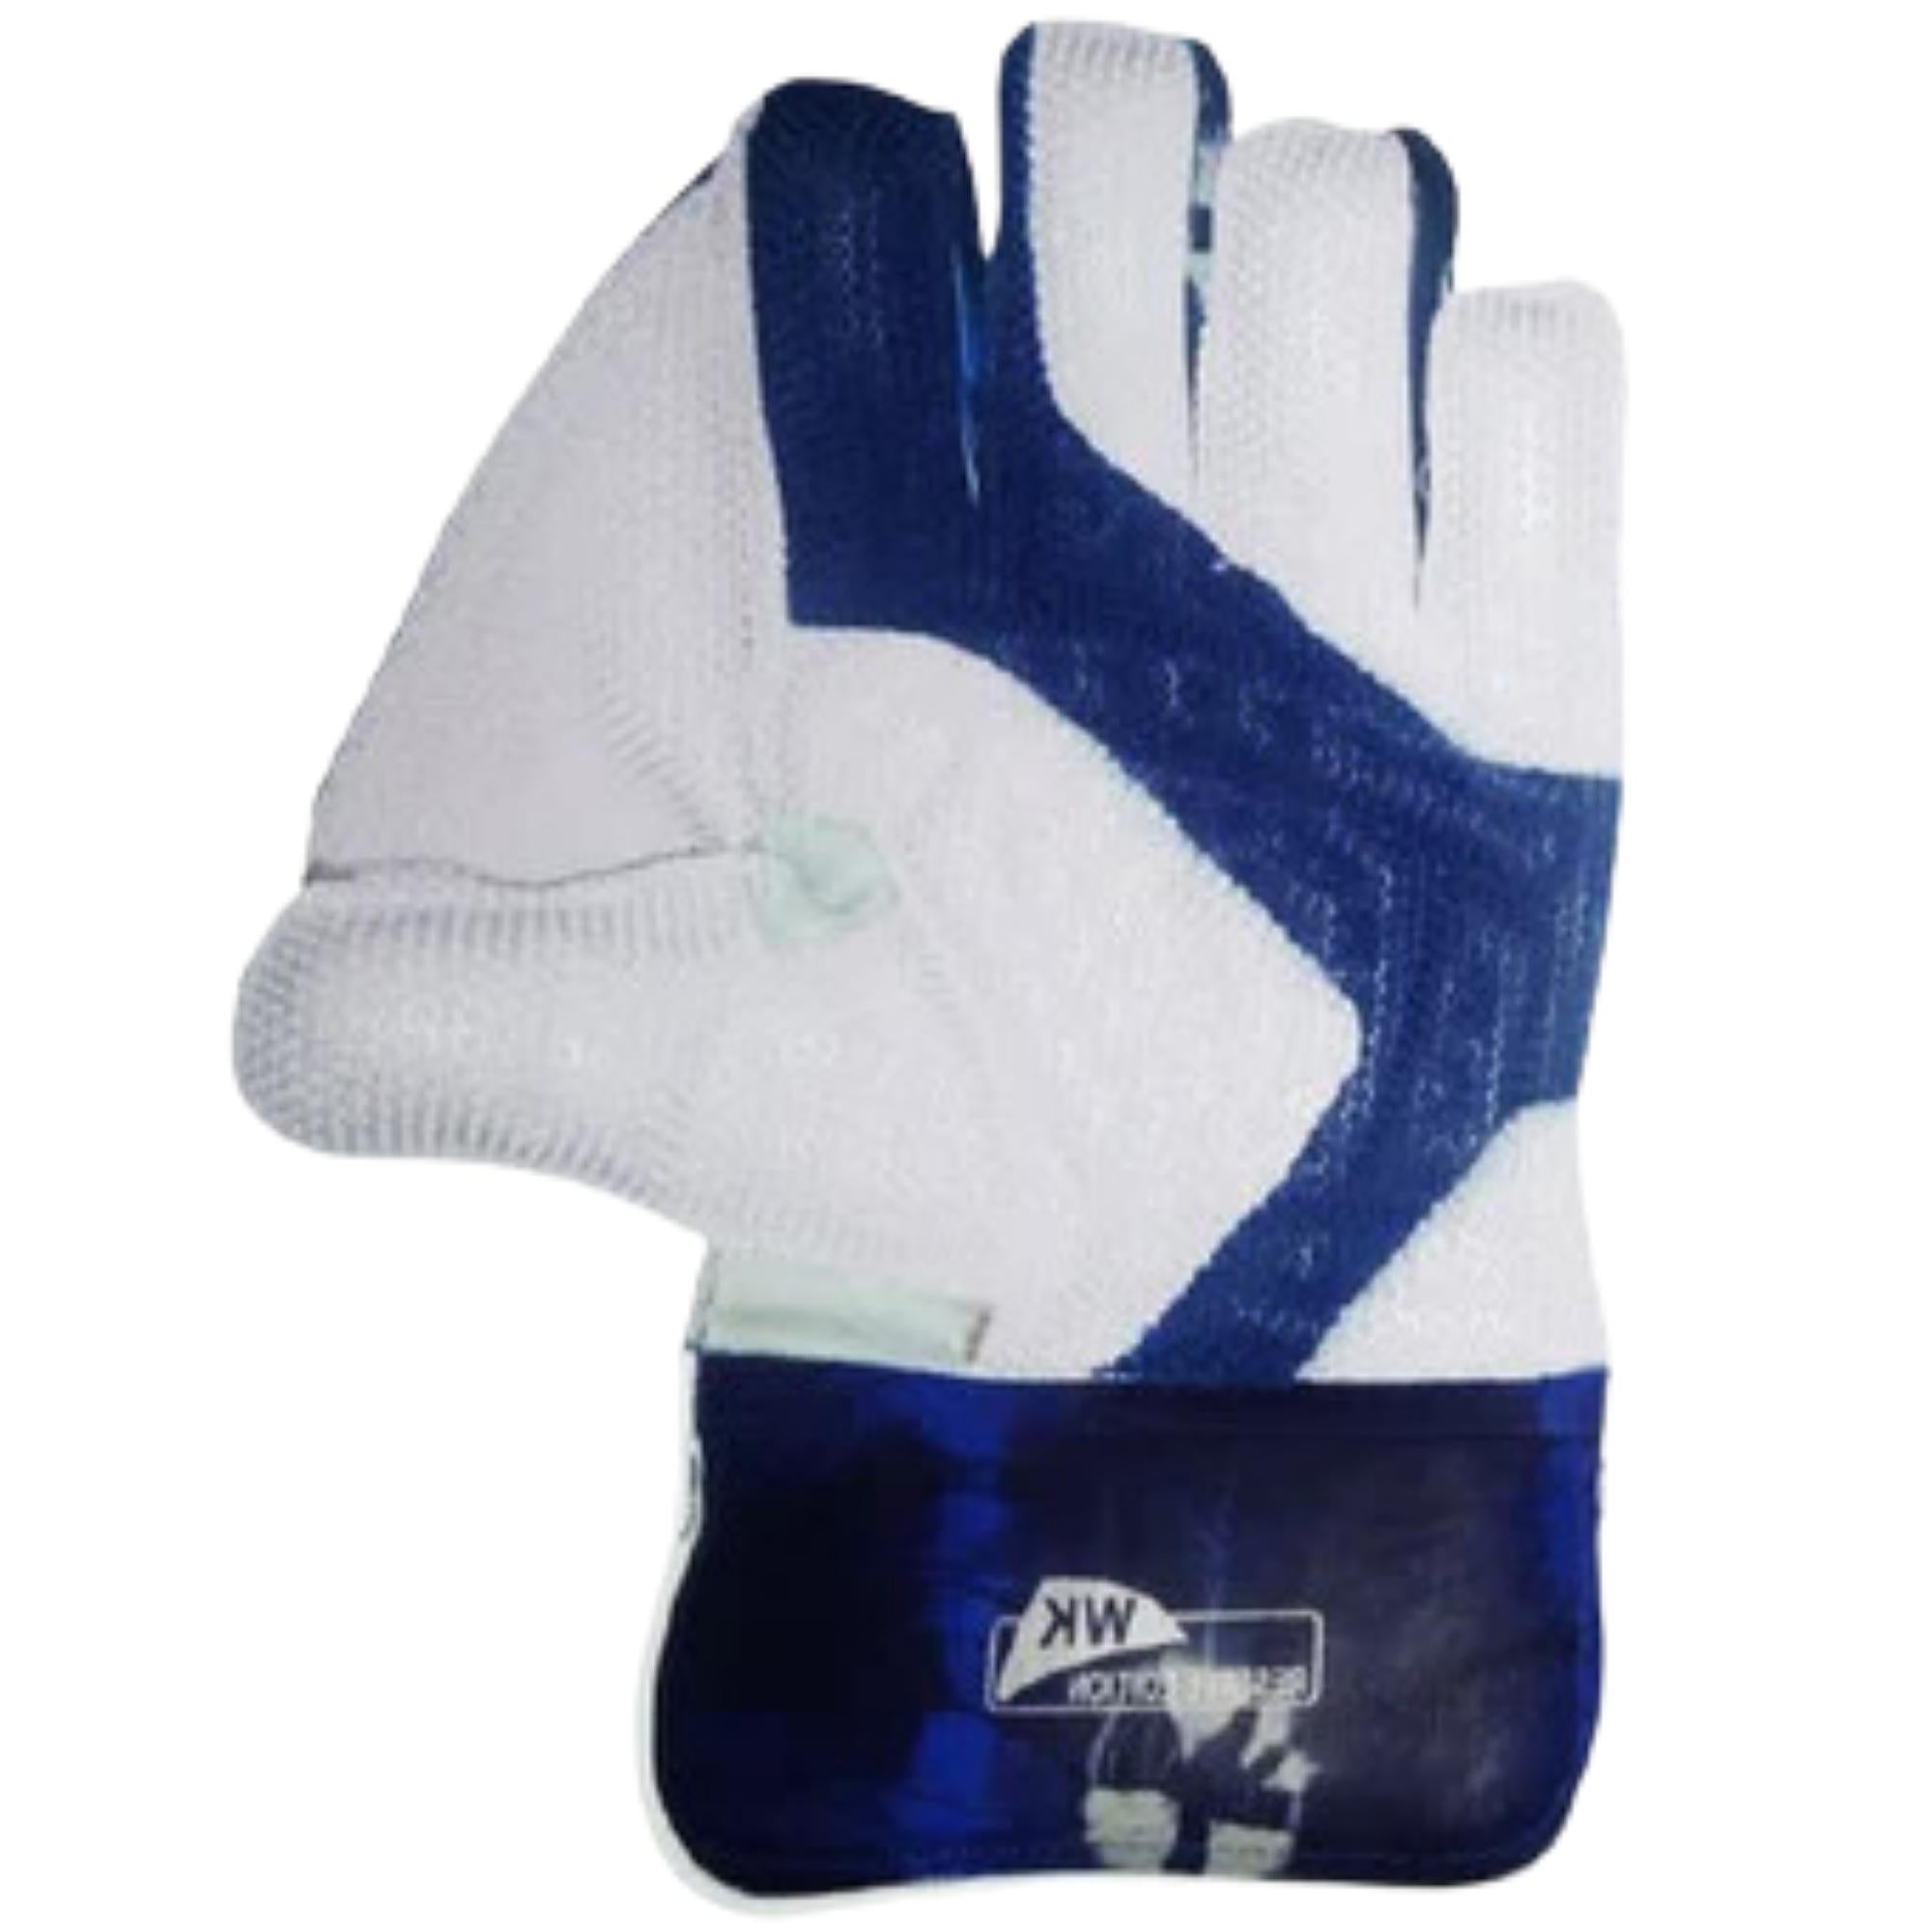 SS TON Wicket Keeping Gloves Reserve Edition Large Size